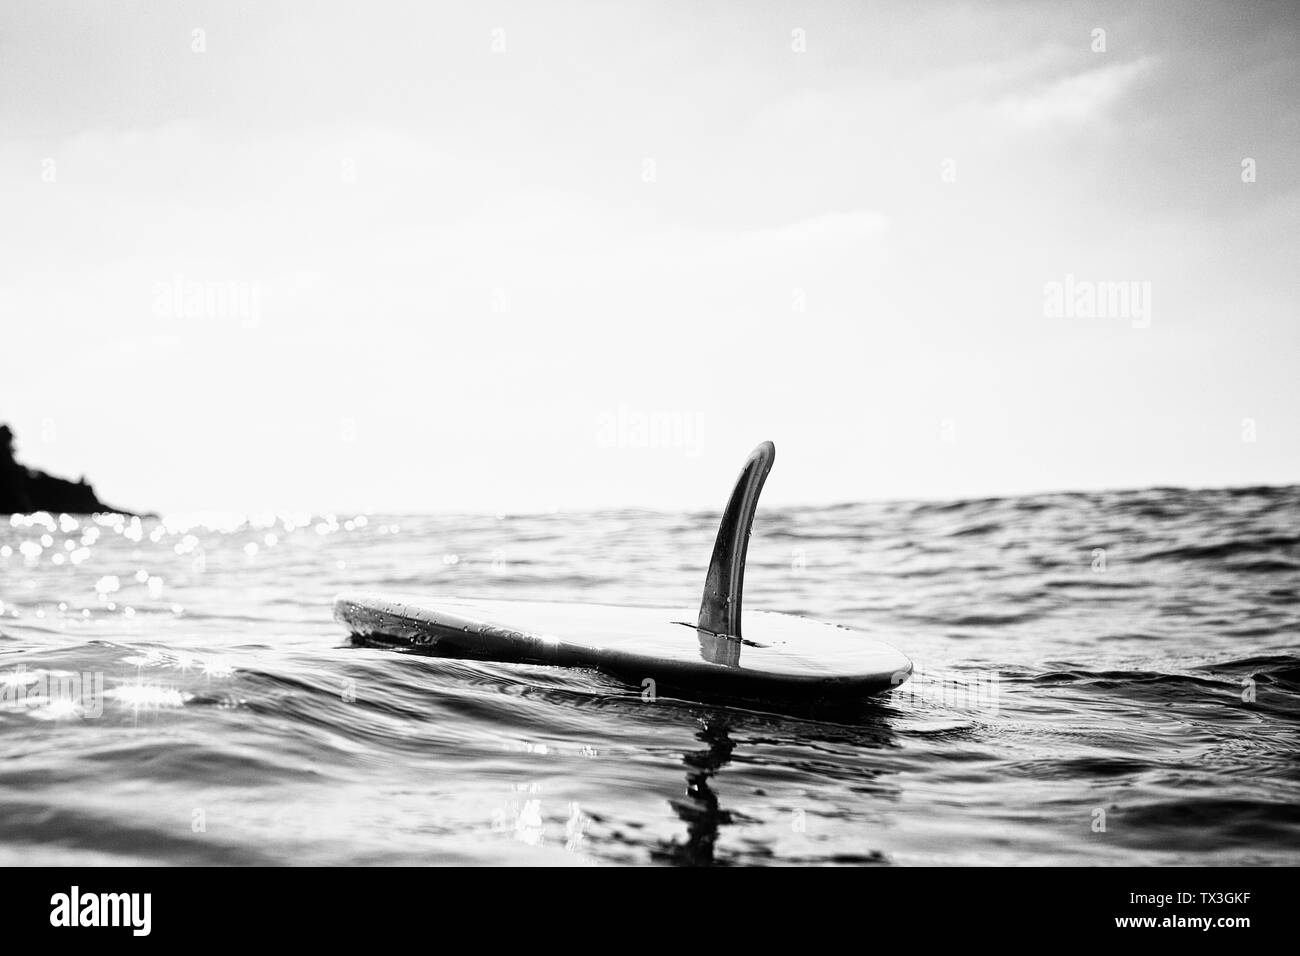 Surfboard with fin floating on sunny ocean water, San Pancho, Nayarit, Mexico Stock Photo